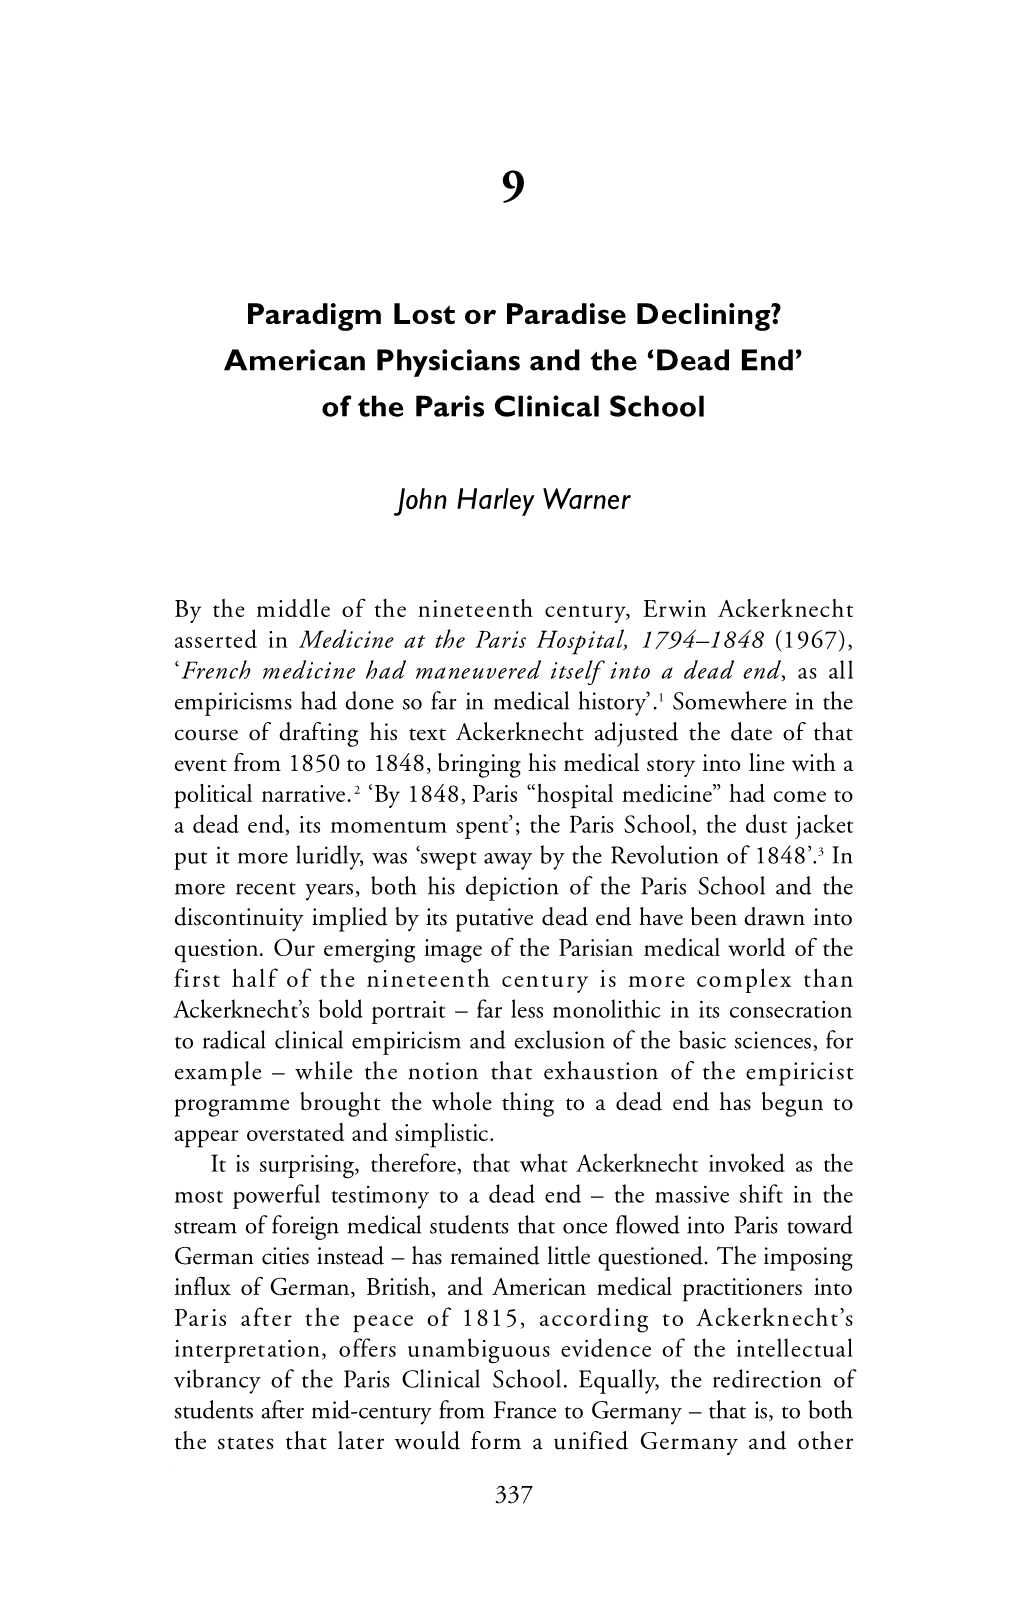 Paradigm Lost Or Paradise Declining? American Physicians and the ‘Dead End’ of the Paris Clinical School